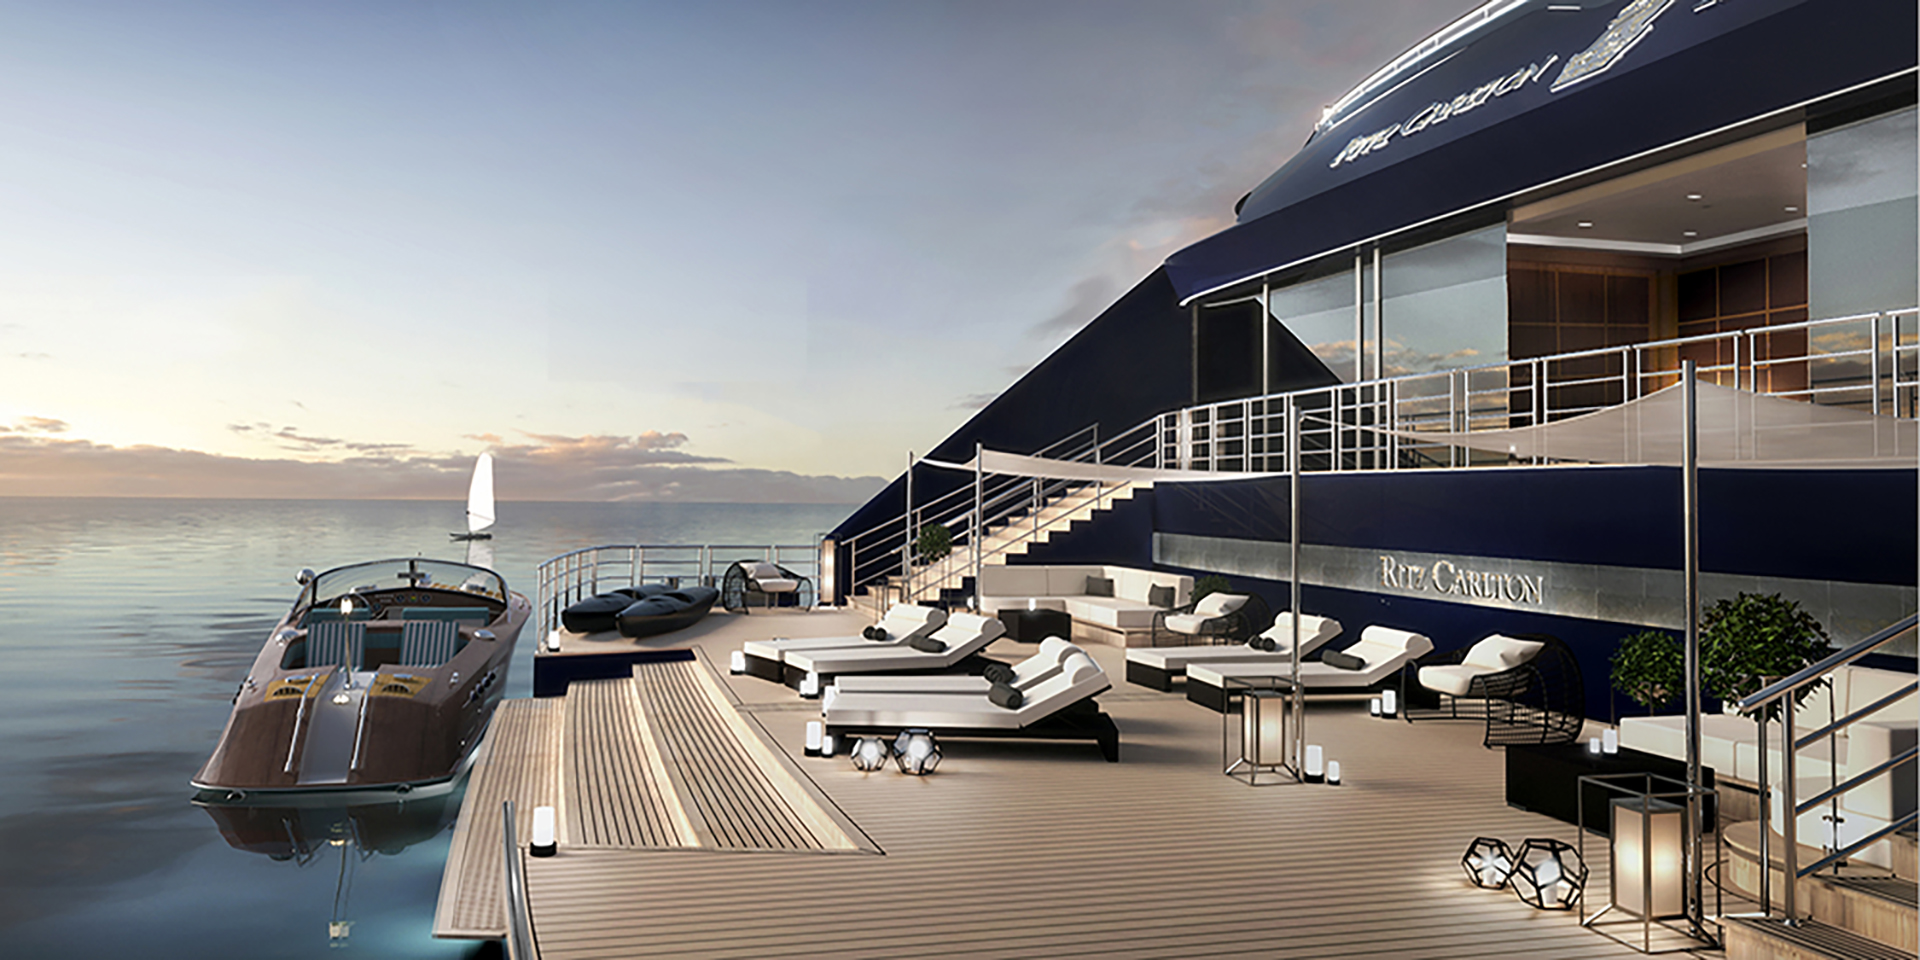 The Ritz-Carlton Takes to the Sea – First Luxury Hotel Brand to Offer Bespoke Yacht Experiences